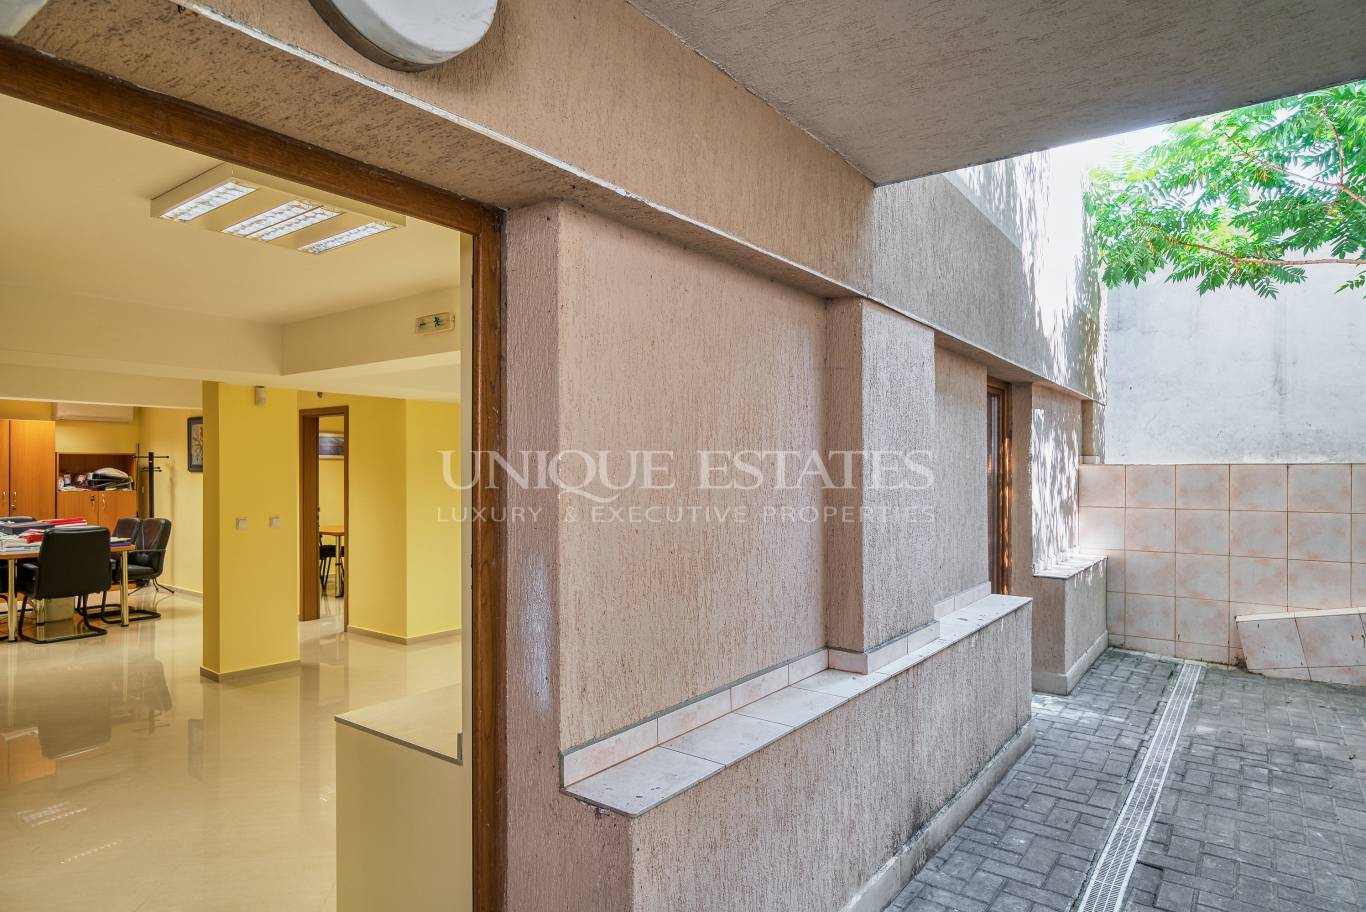 Office for sale in Sofia, Downtown with listing ID: K14097 - image 9